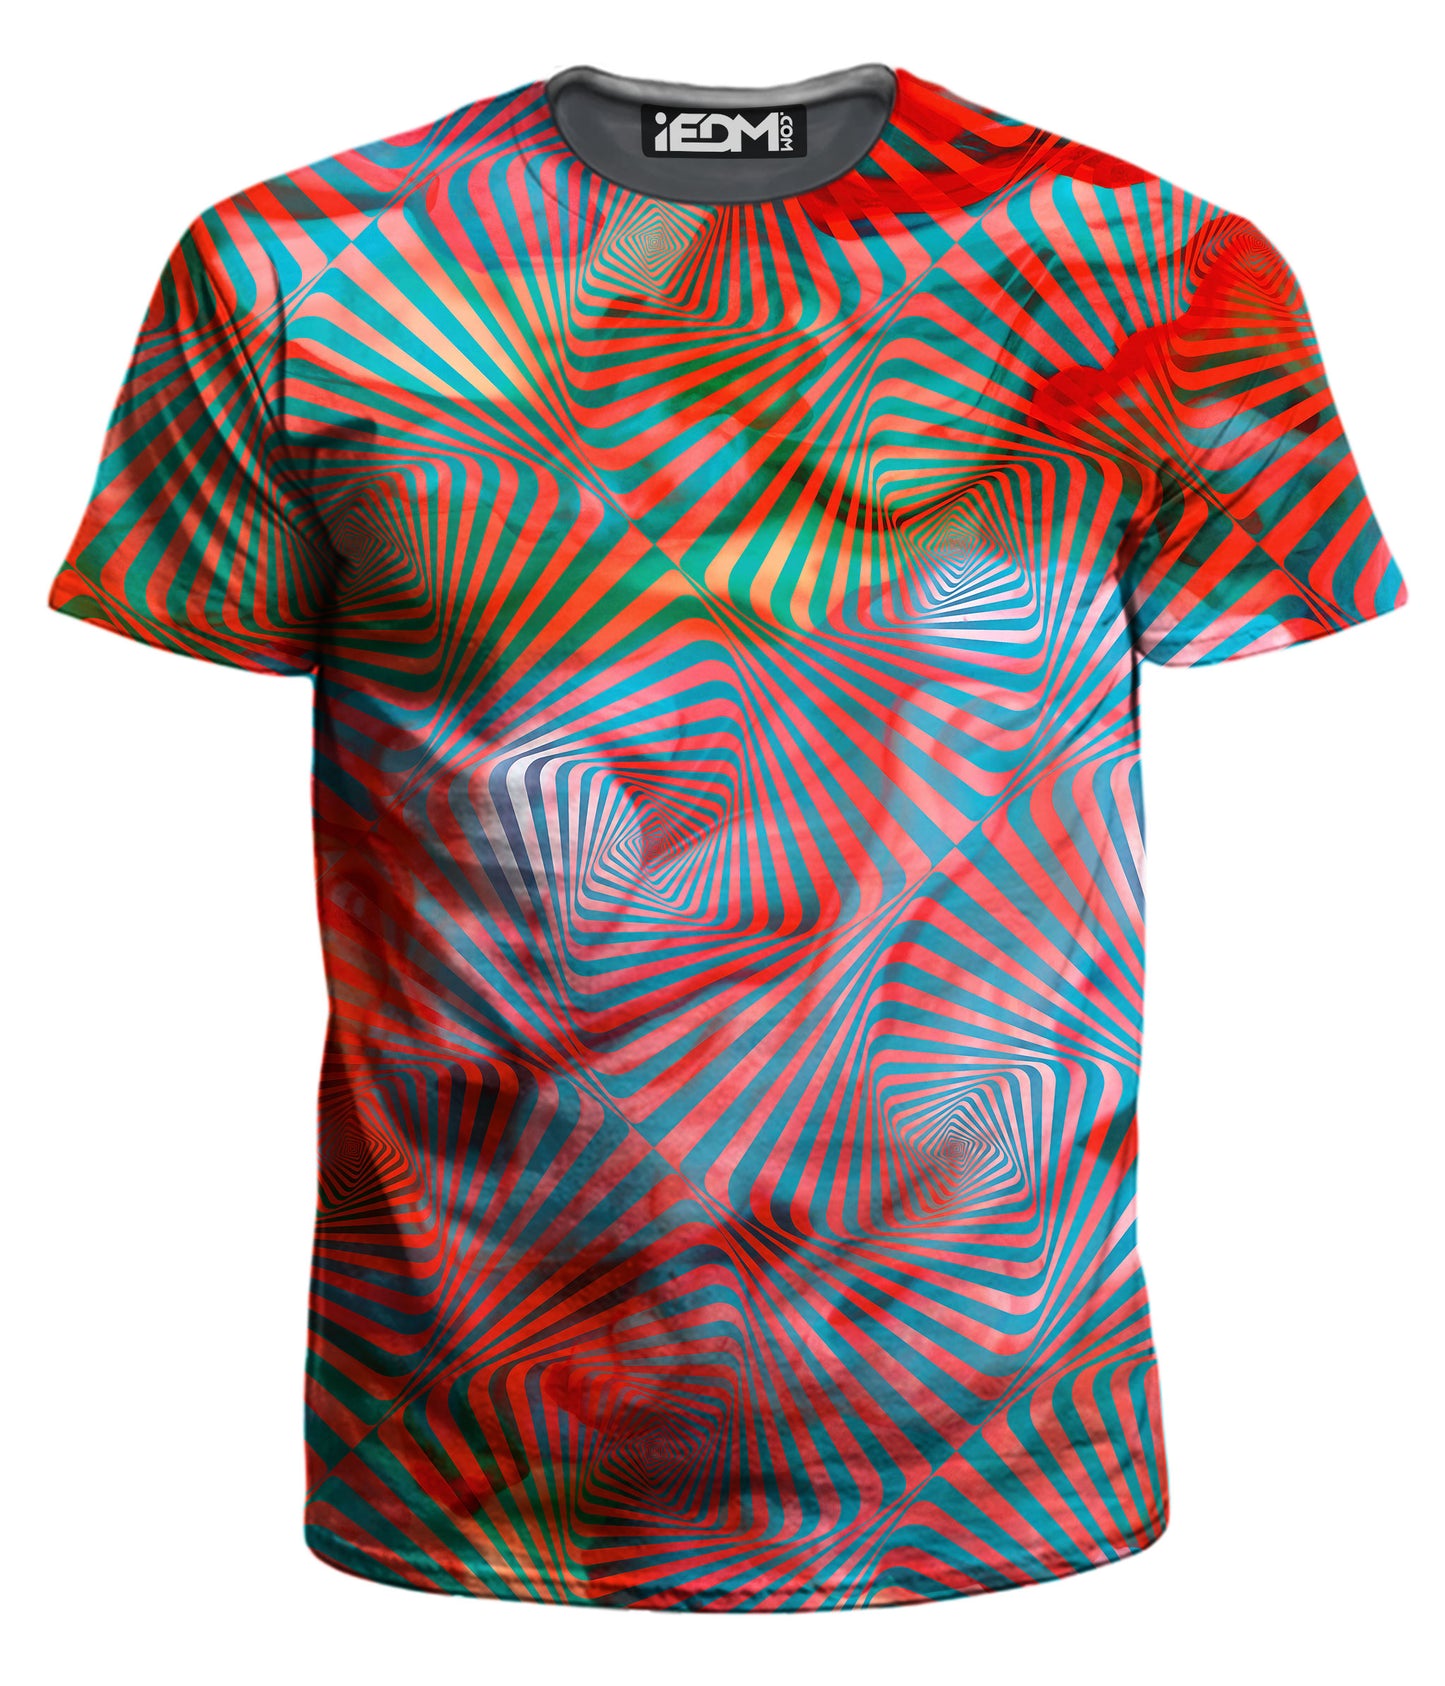 Solstice T-Shirt and Shorts Combo, Art Design Works, | iEDM